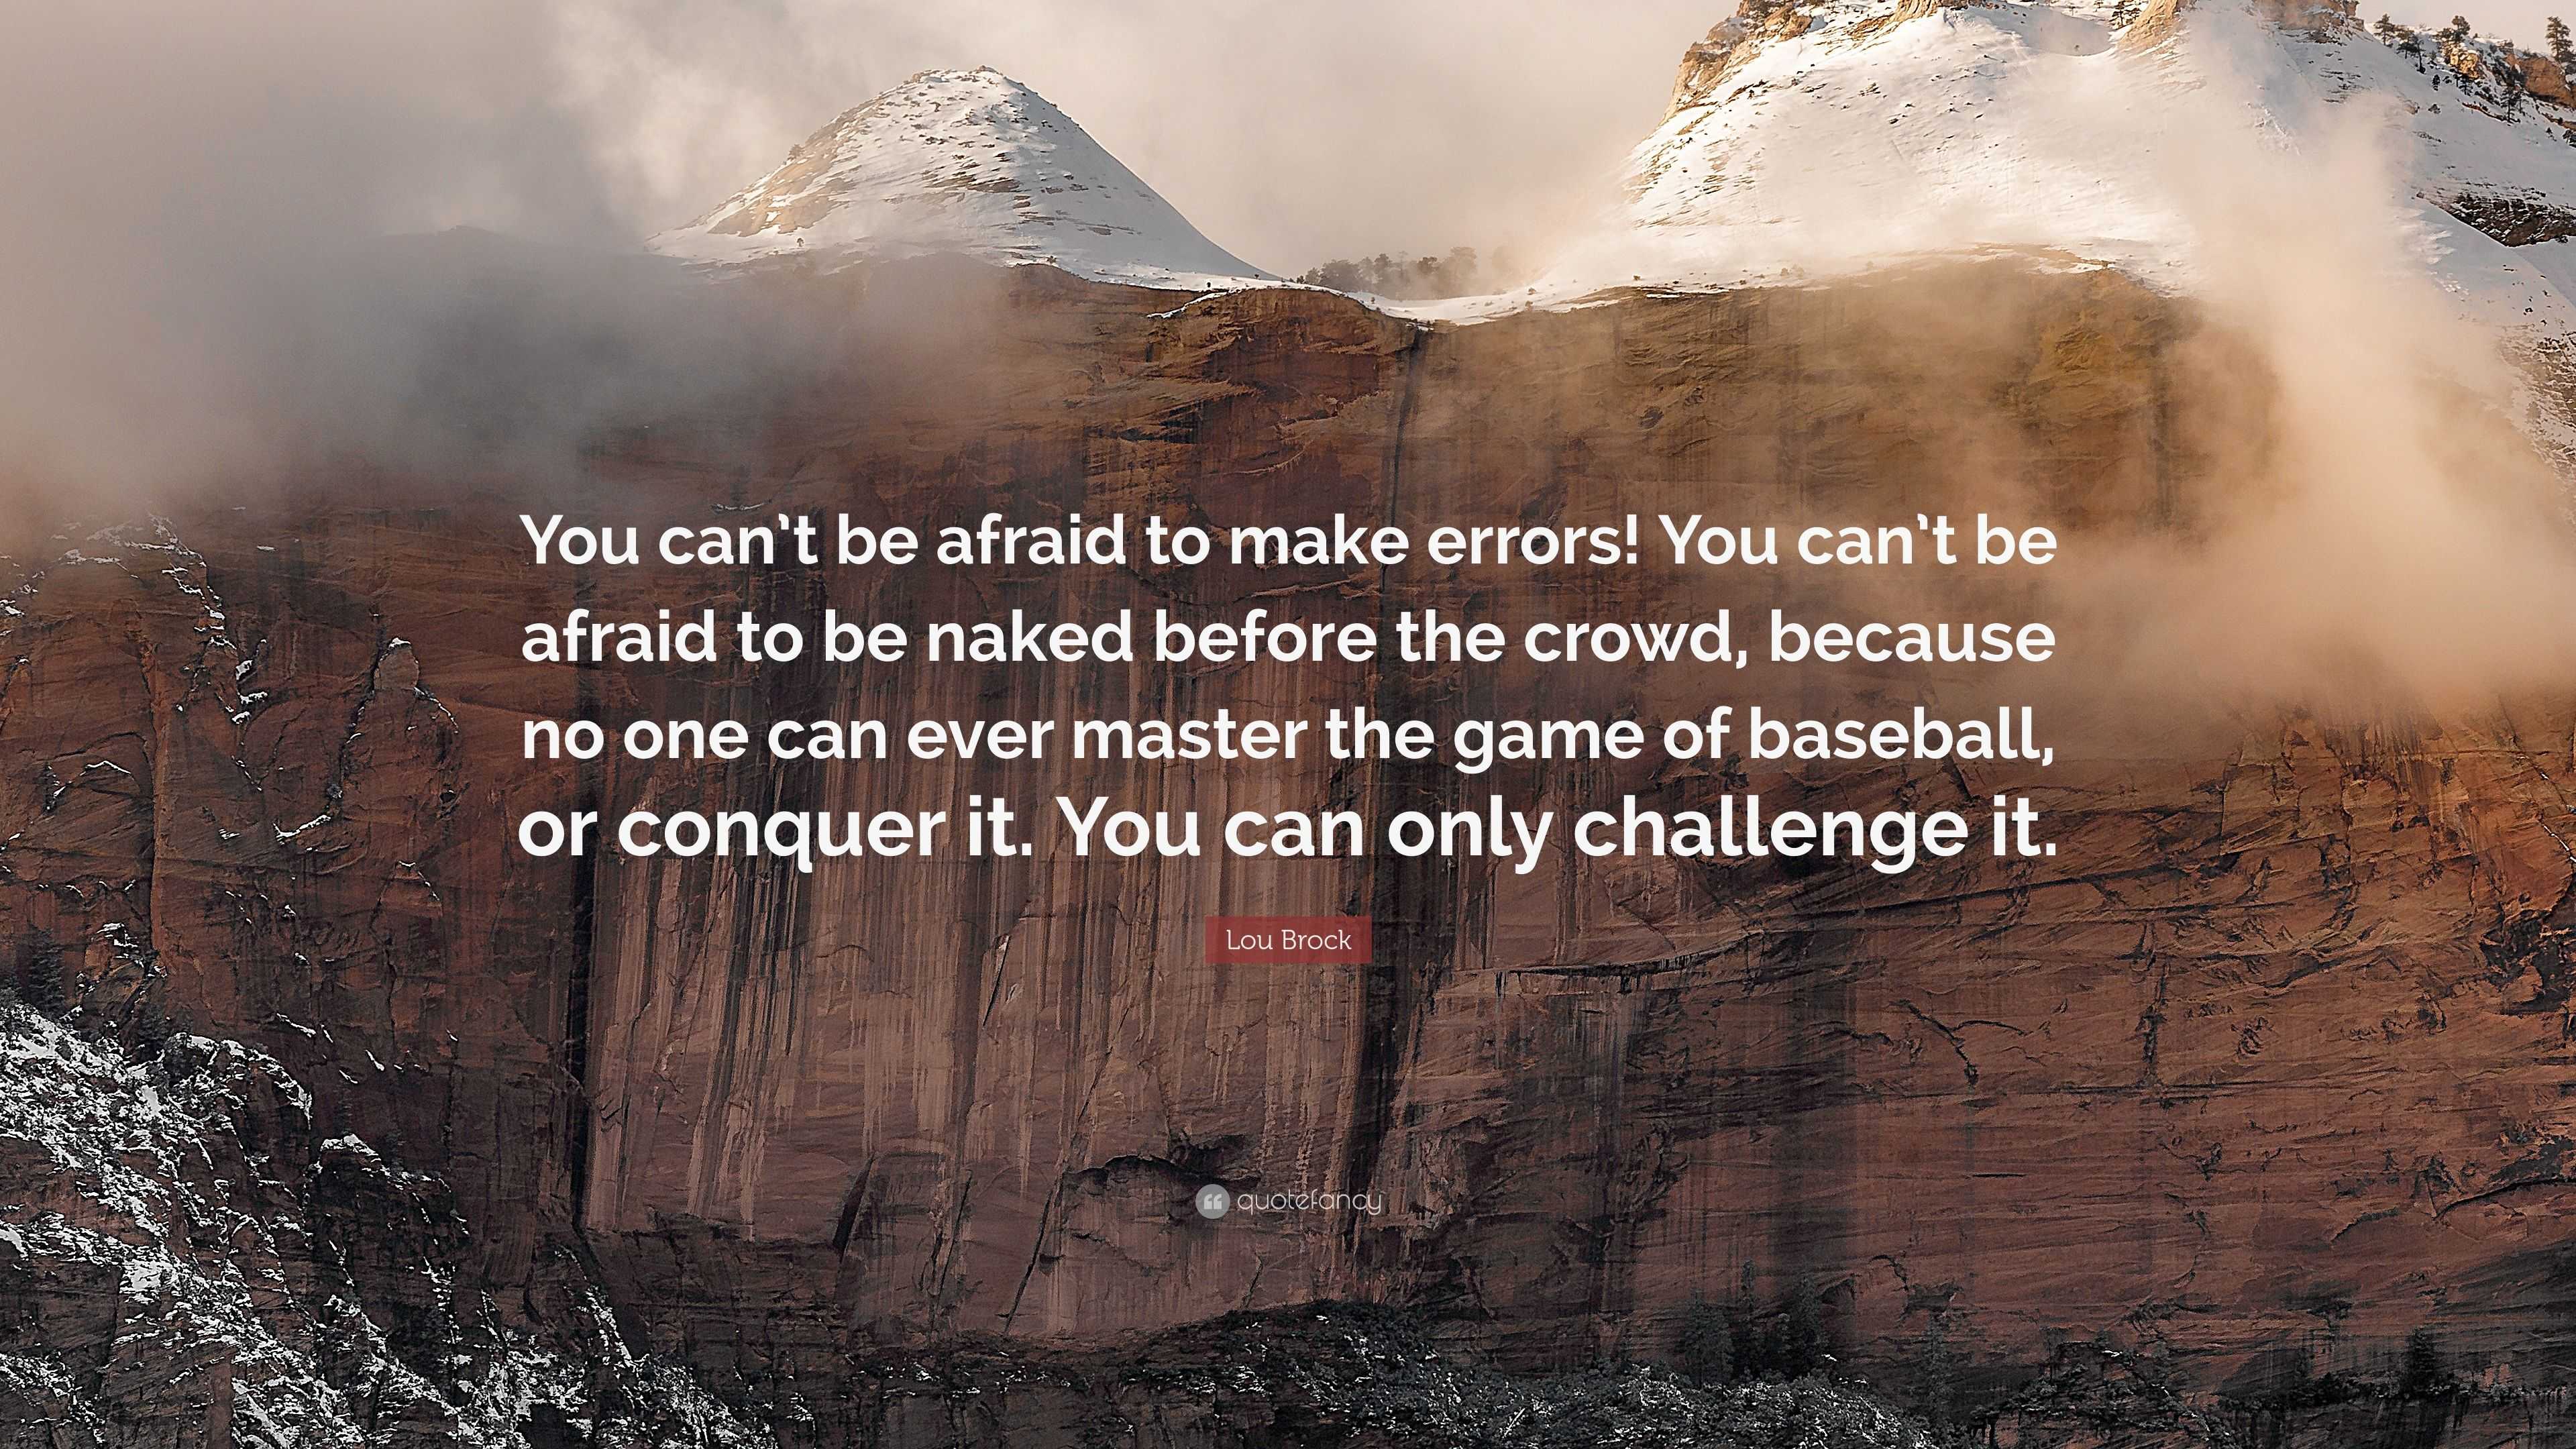 Lou Brock Quote: “You can't be afraid to make errors! You can't be